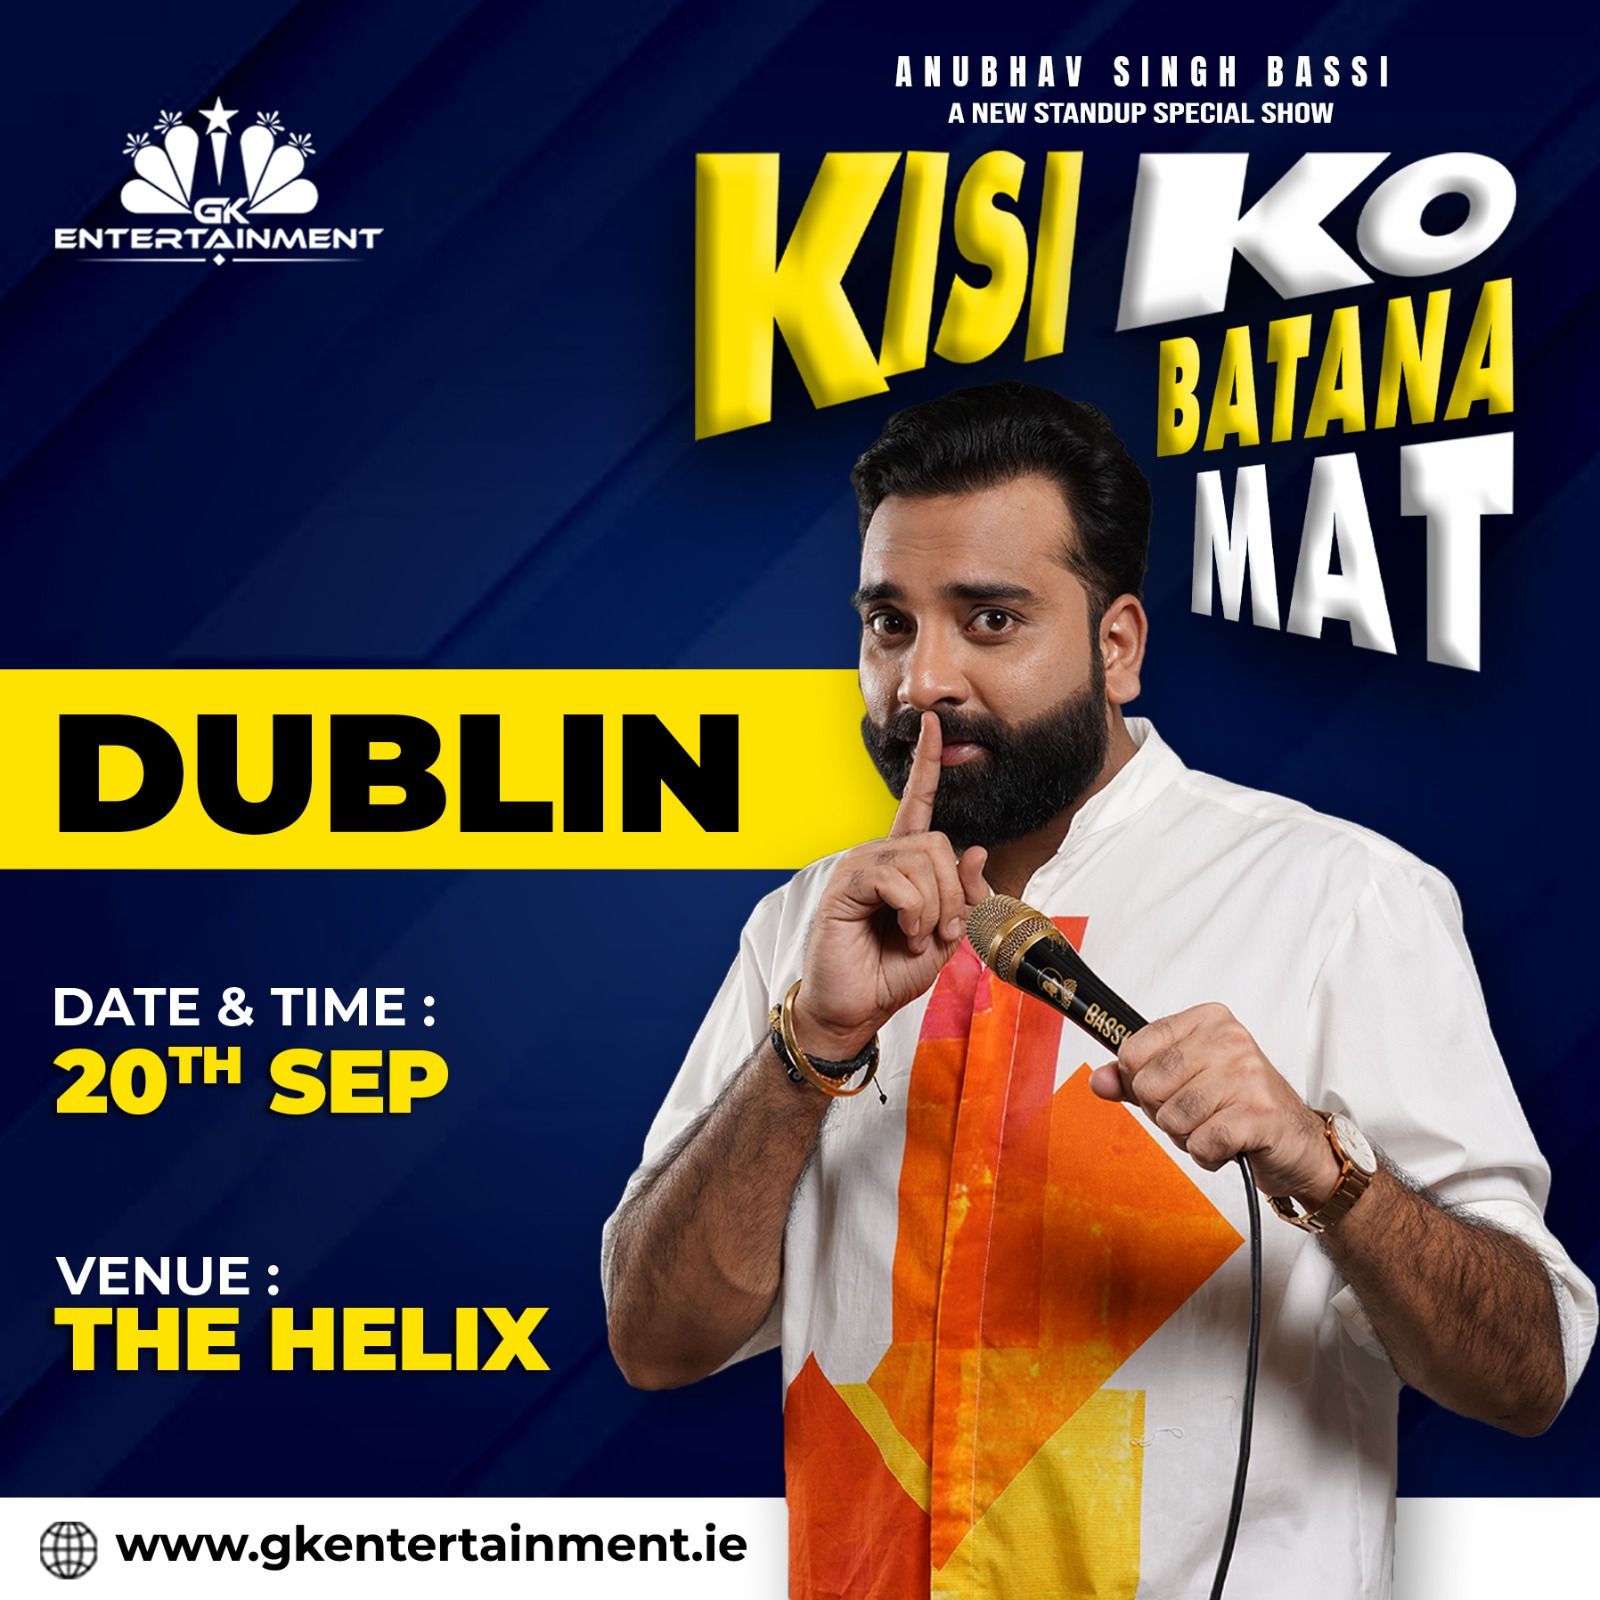 Anubhav Singh Bassi returns to Dublin stand-up show, 